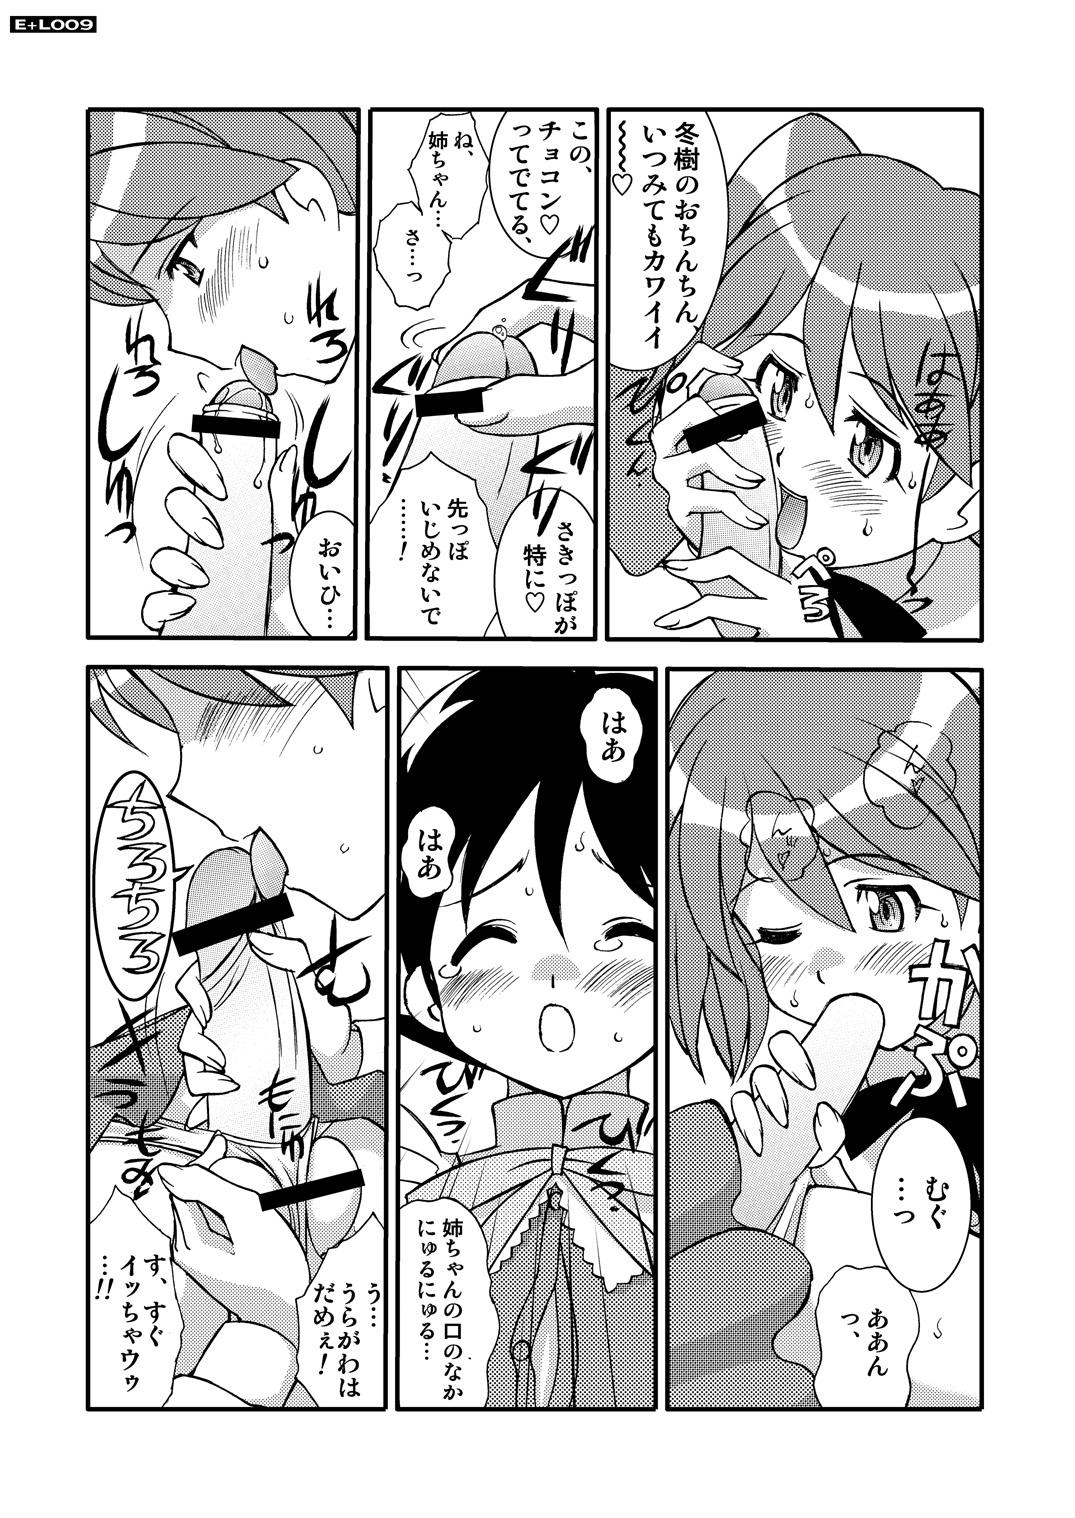 3some Energetic Love - Keroro gunsou Gay Trimmed - Page 8